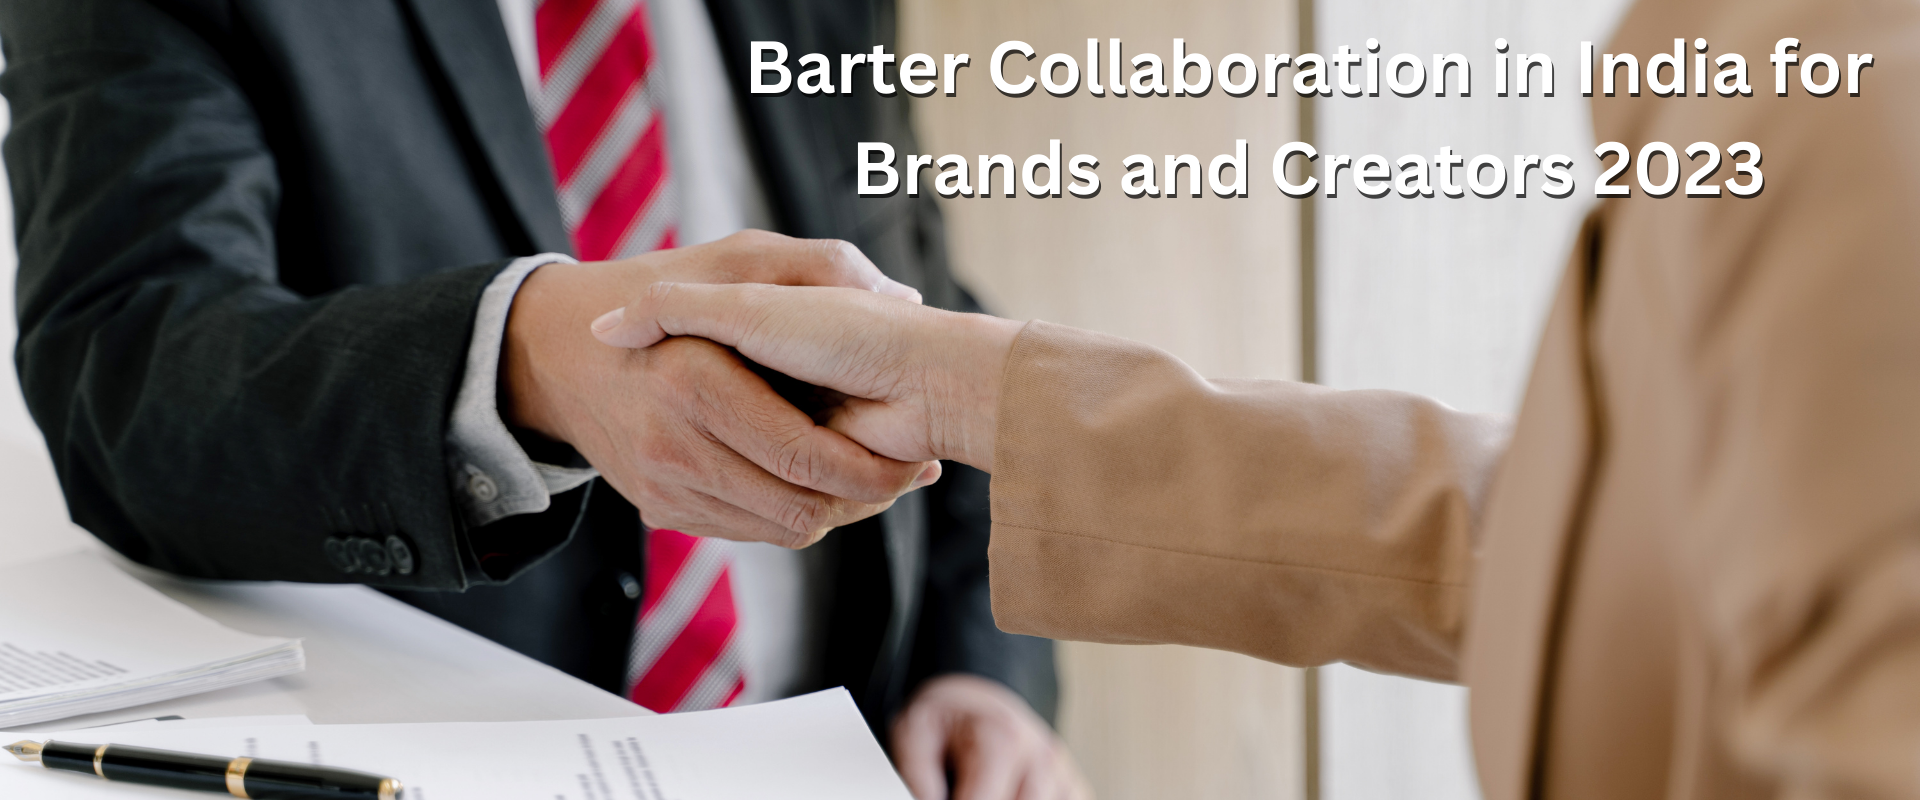 Complete Guide to Barter Collaboration in India for Brands and Creators 2023